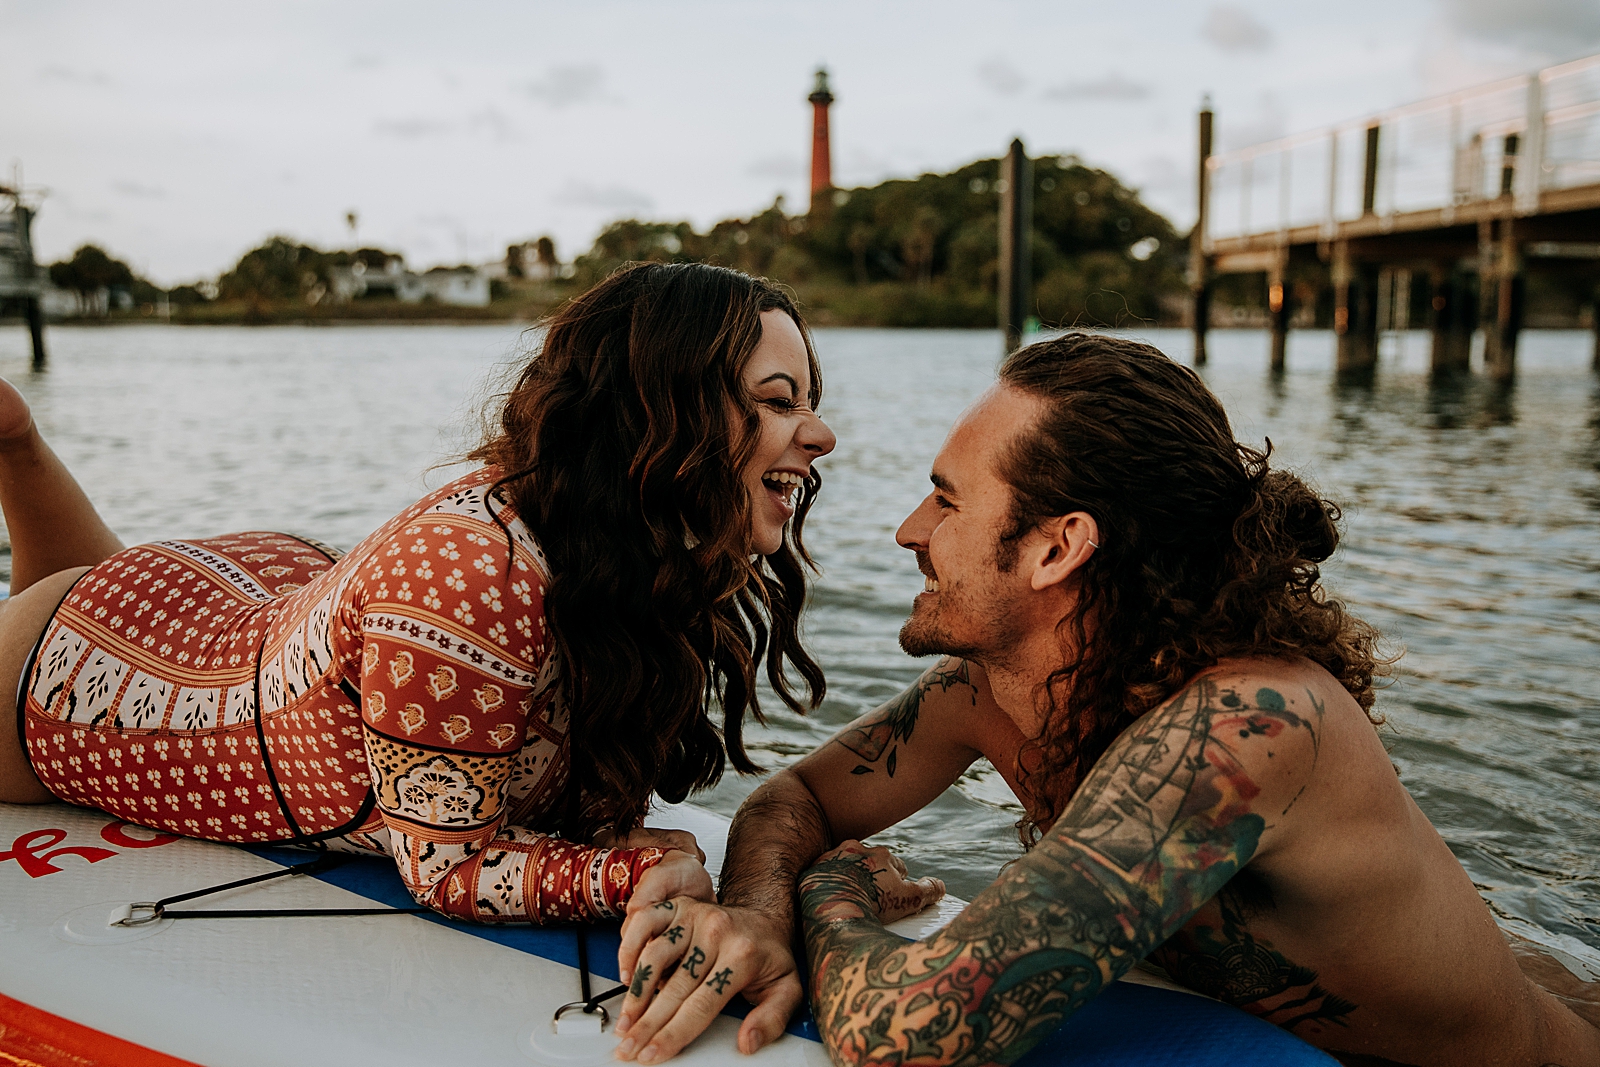 Woman laughing on paddle board with man floating in water holding the paddle board Dubois Park Engagement Photography captured by South Florida Family Photographer Maggie Alvarez Photography